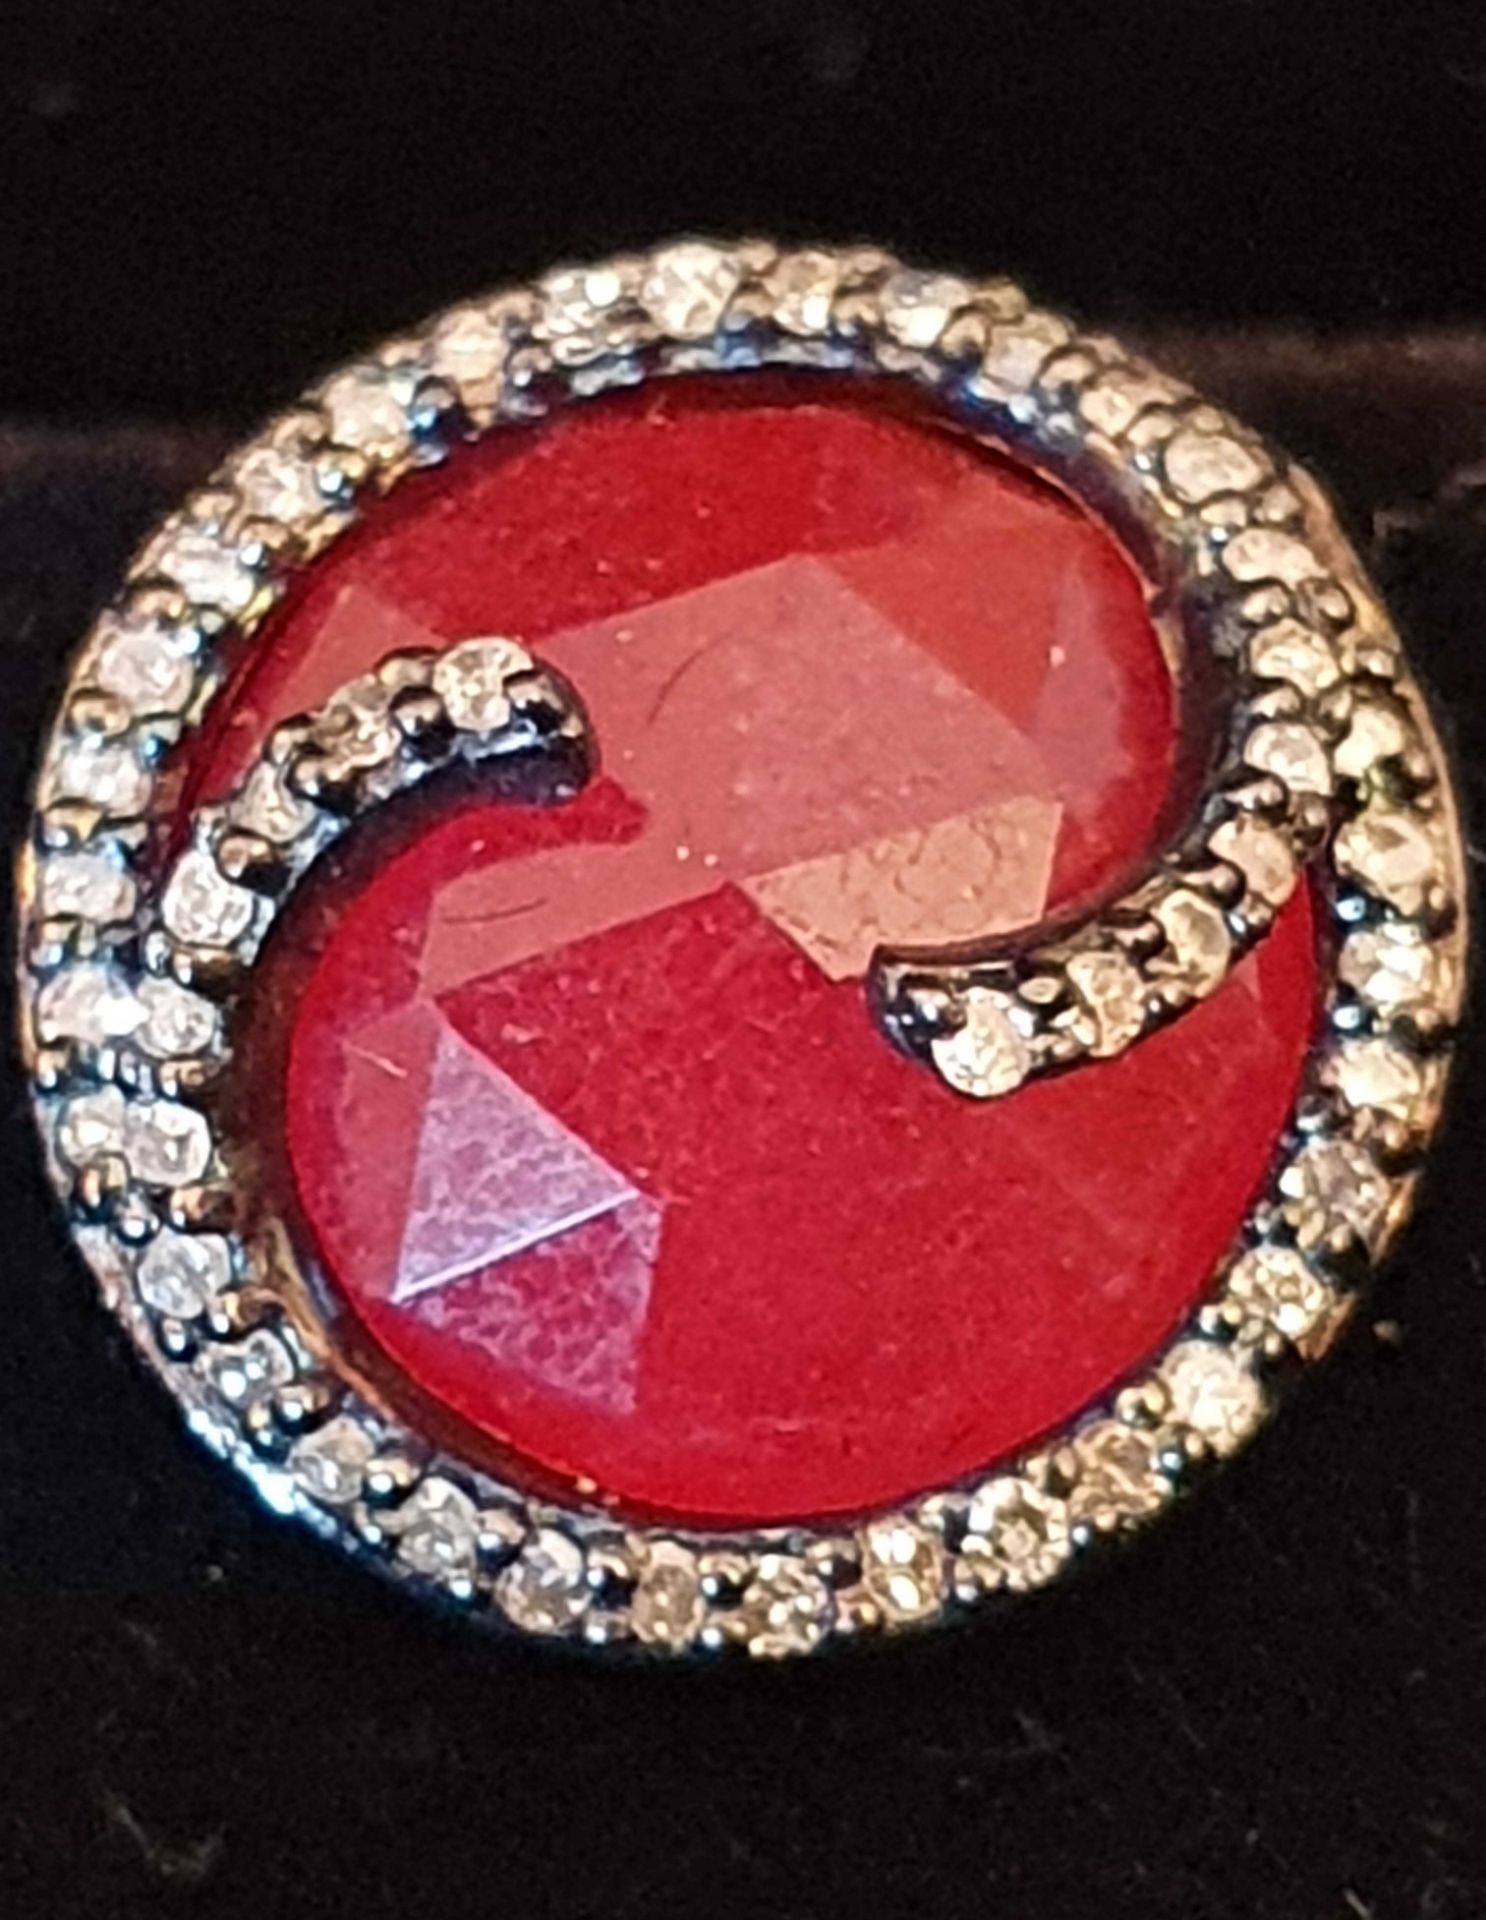 Pair of Circular Earrings, Opaque Red Stone surrounded by Small (Agate) Diamonds complete in White - Image 4 of 5